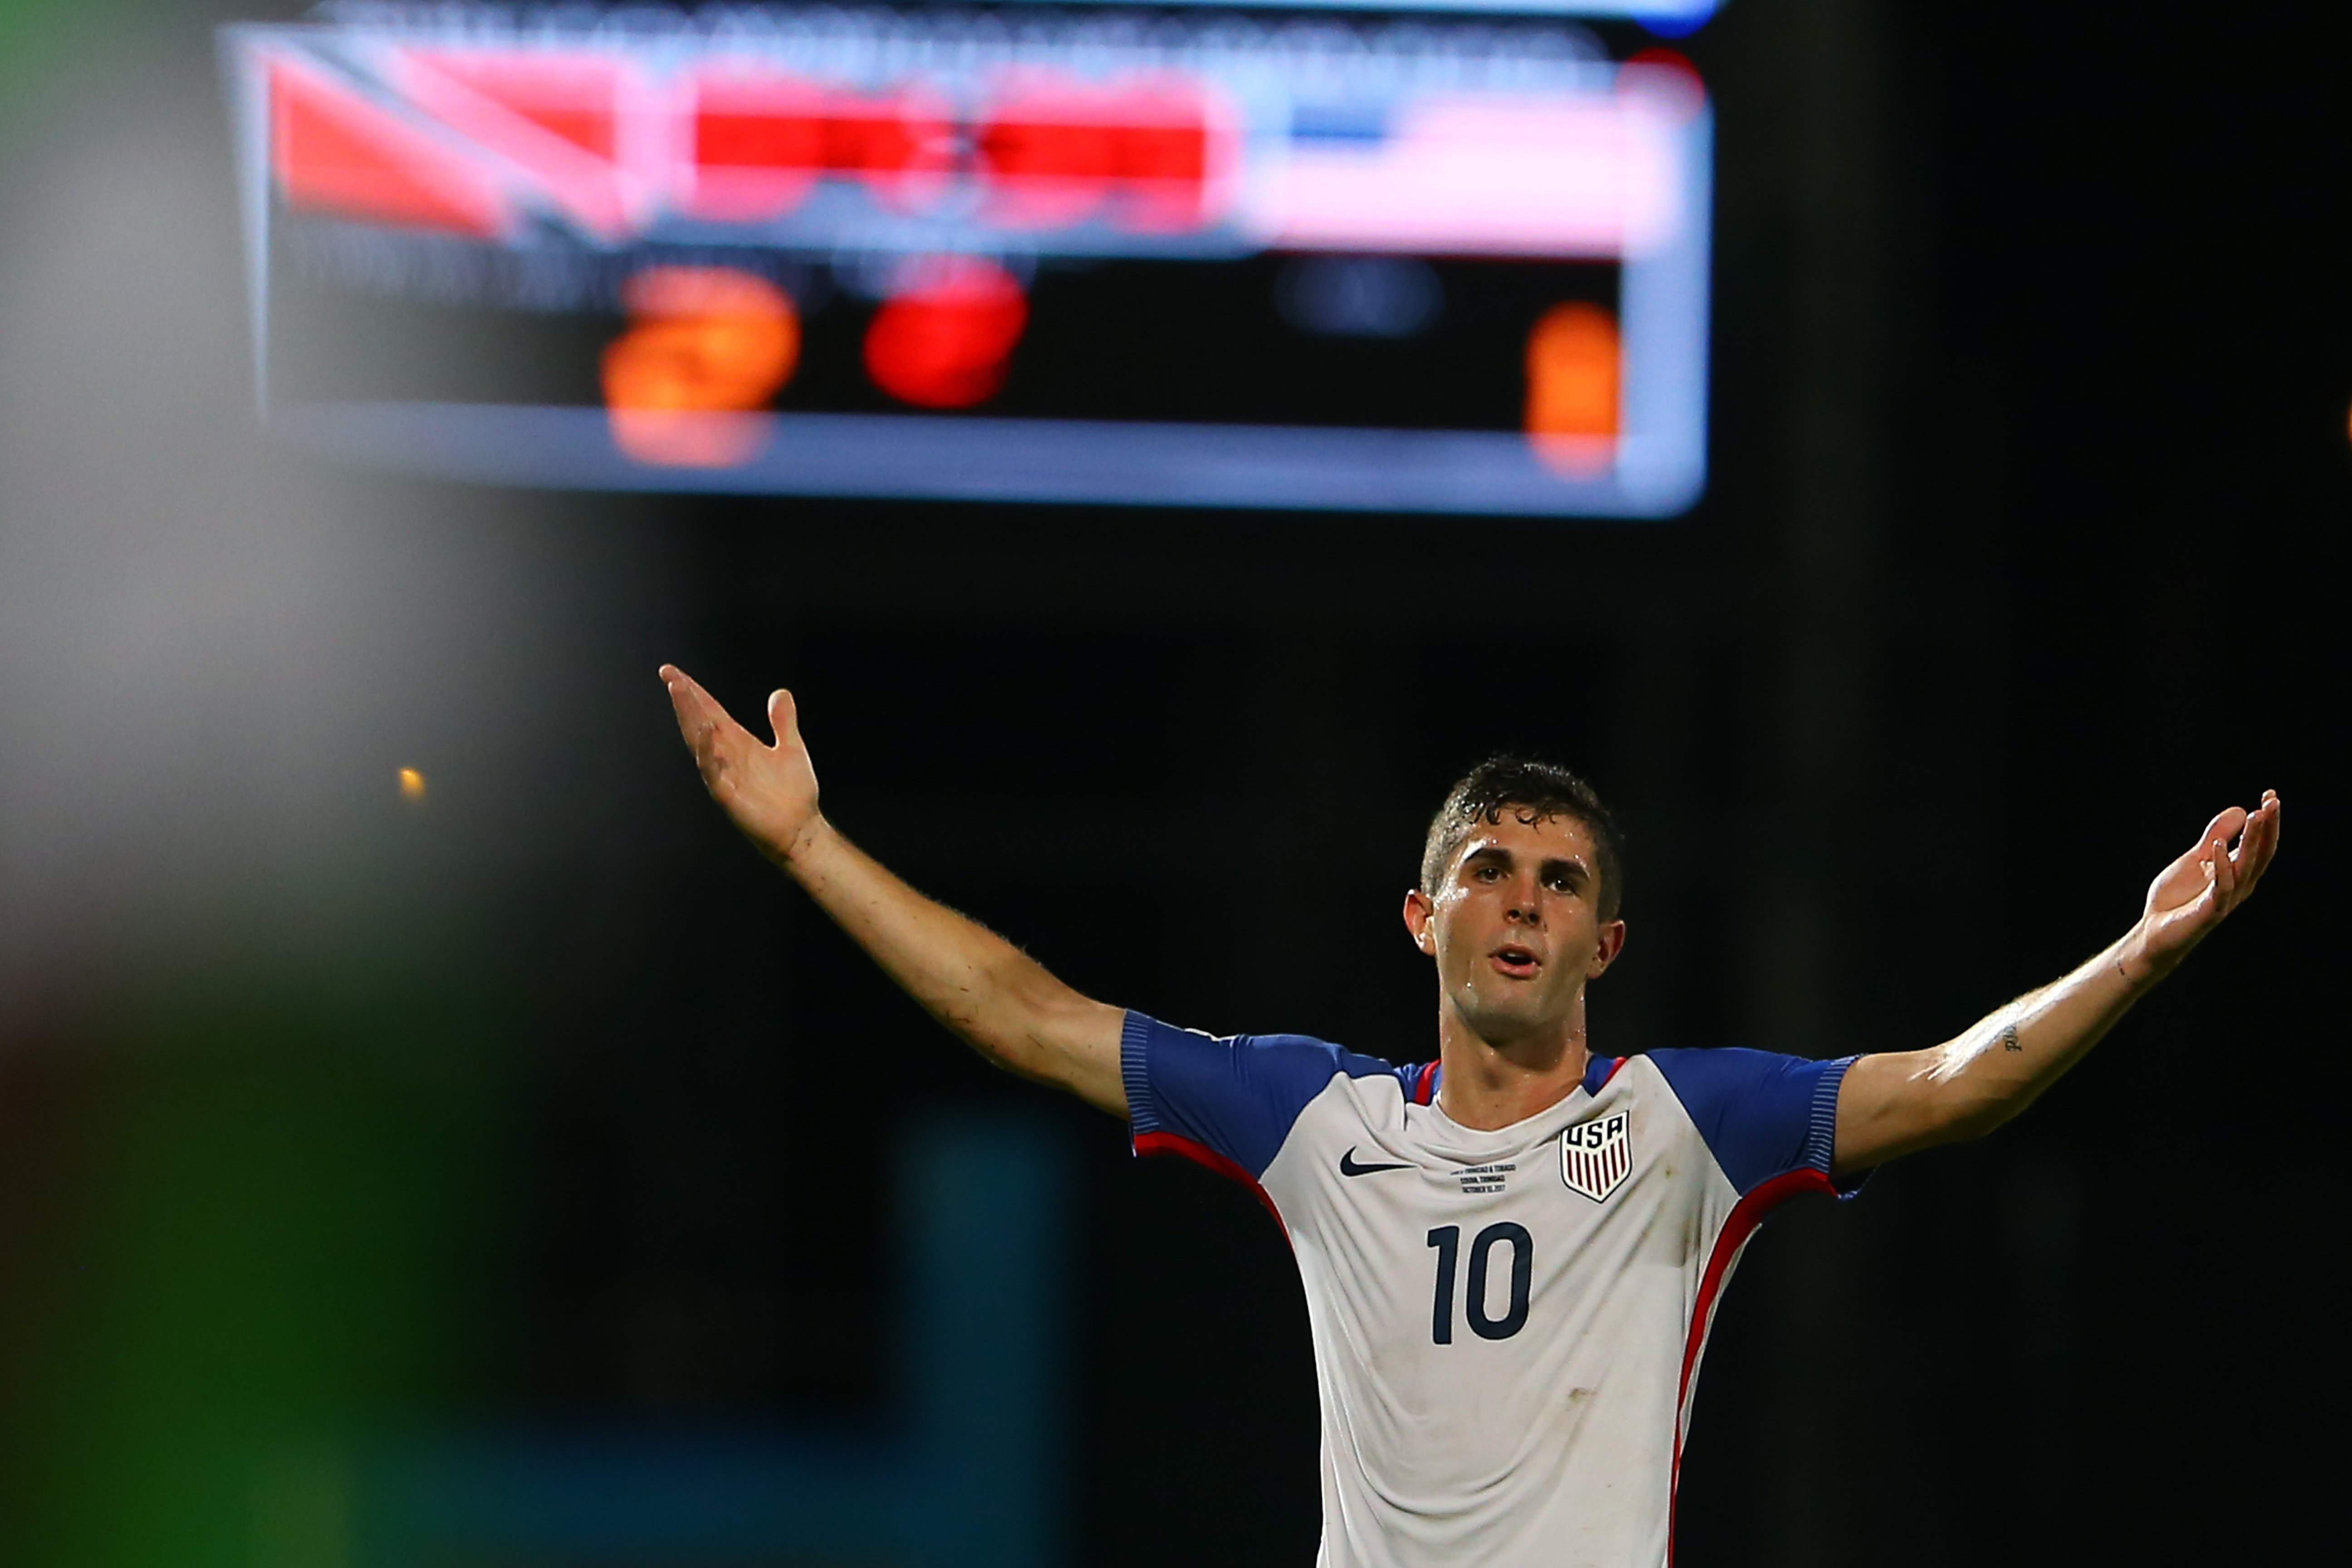 Pulisic has already become USA's most important player and everyone will be hoping for another impressive performance, this time against Italy. (Photo courtesy: AFP/Getty)